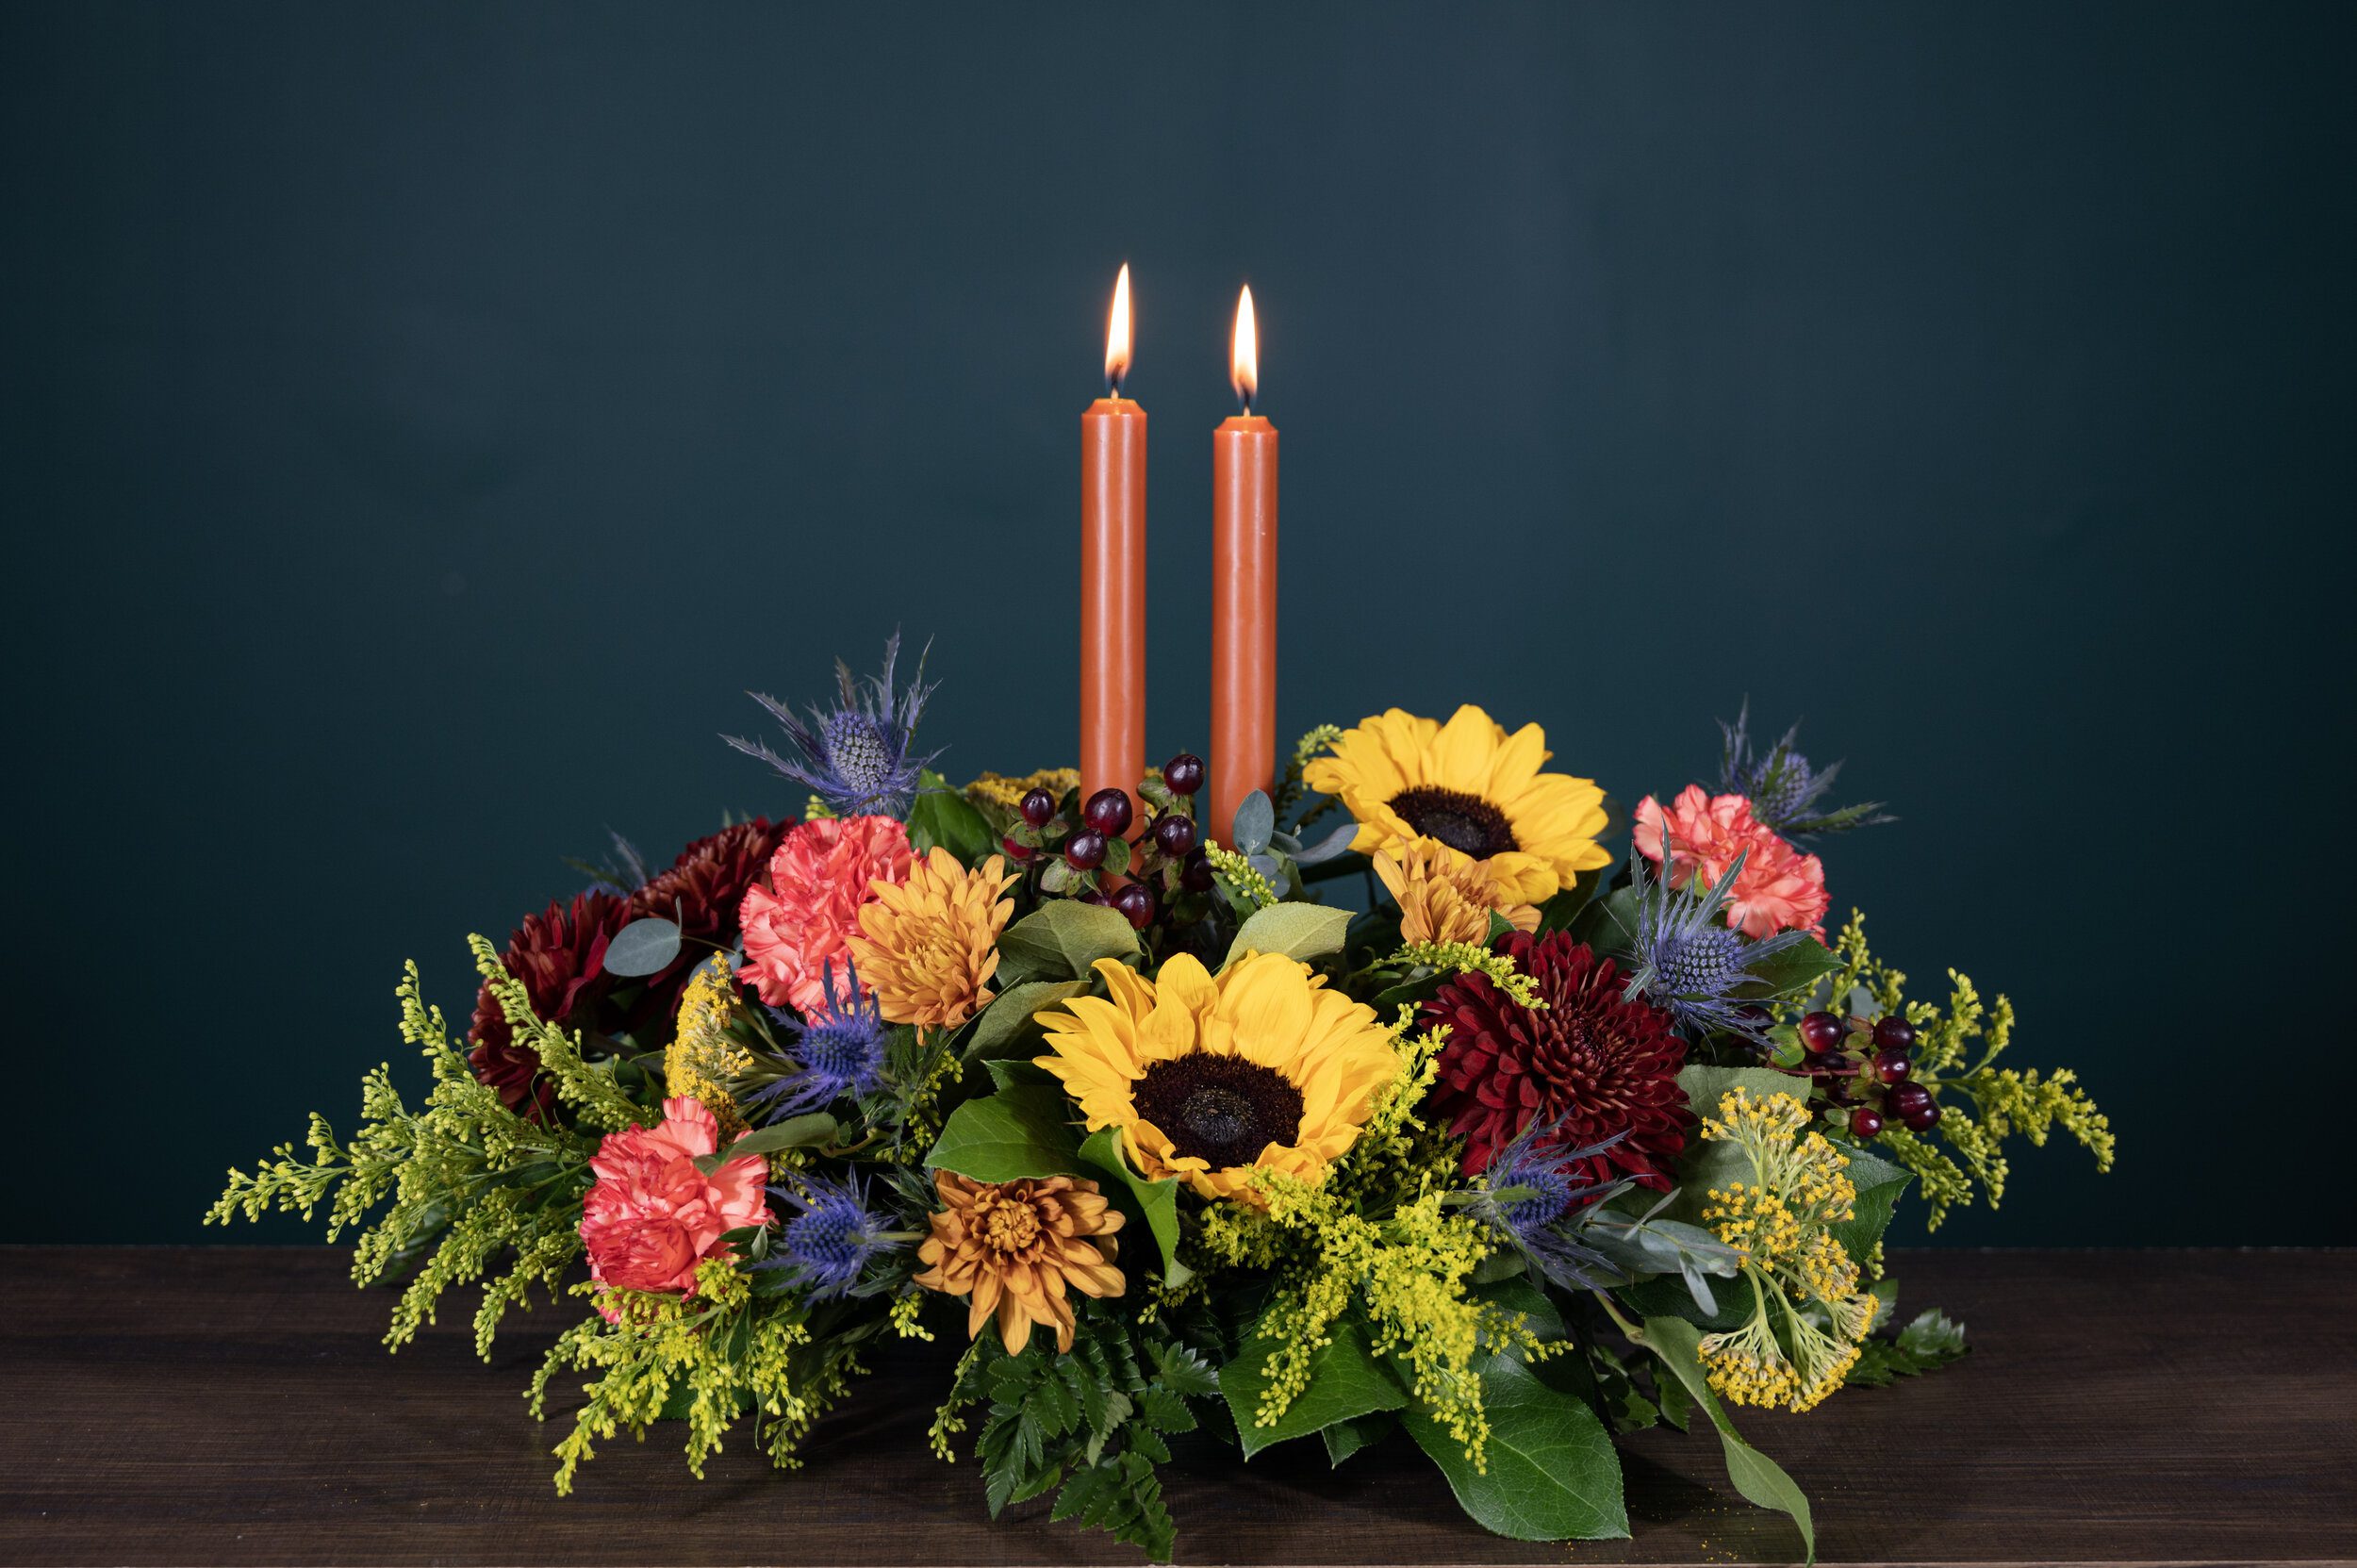 Traditional 2-Candle Centerpiece “Grace”